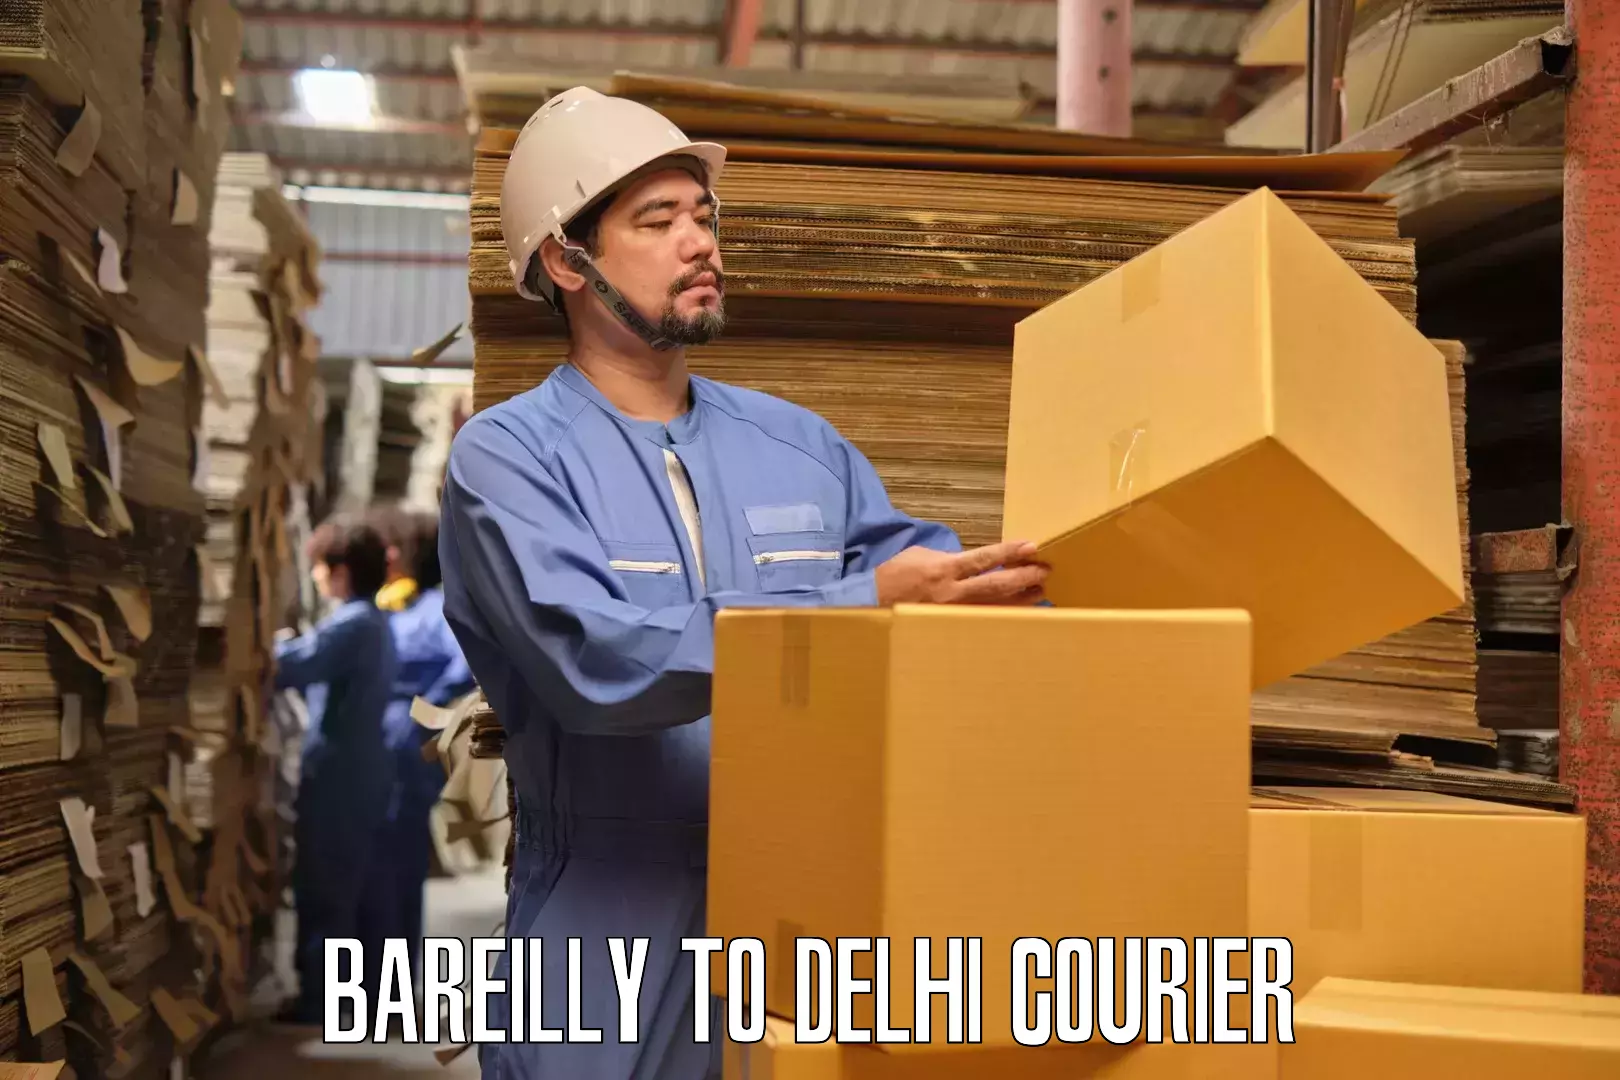 Furniture moving specialists Bareilly to Lodhi Road